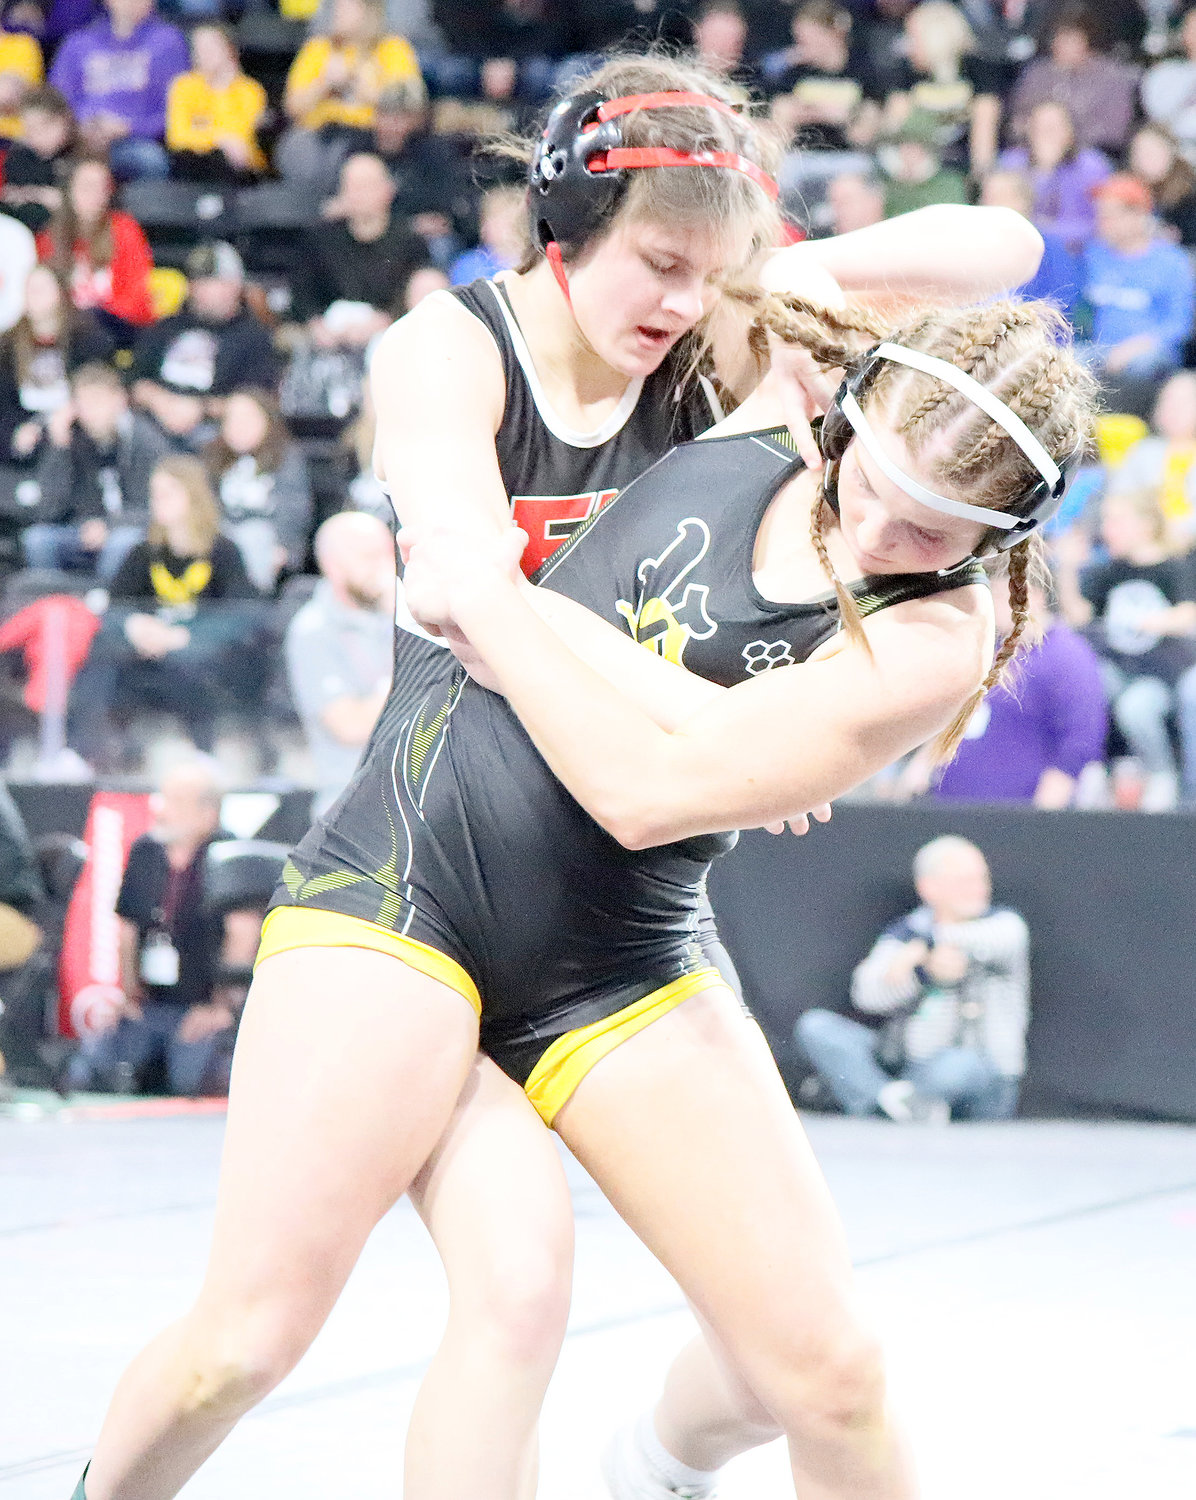 Smith works from the standing position in her first round match against Chloe Sanders of Vinton-Shellsburg. Smith went 1-2 in the 130 lb. division and was eliminated from Friday action.